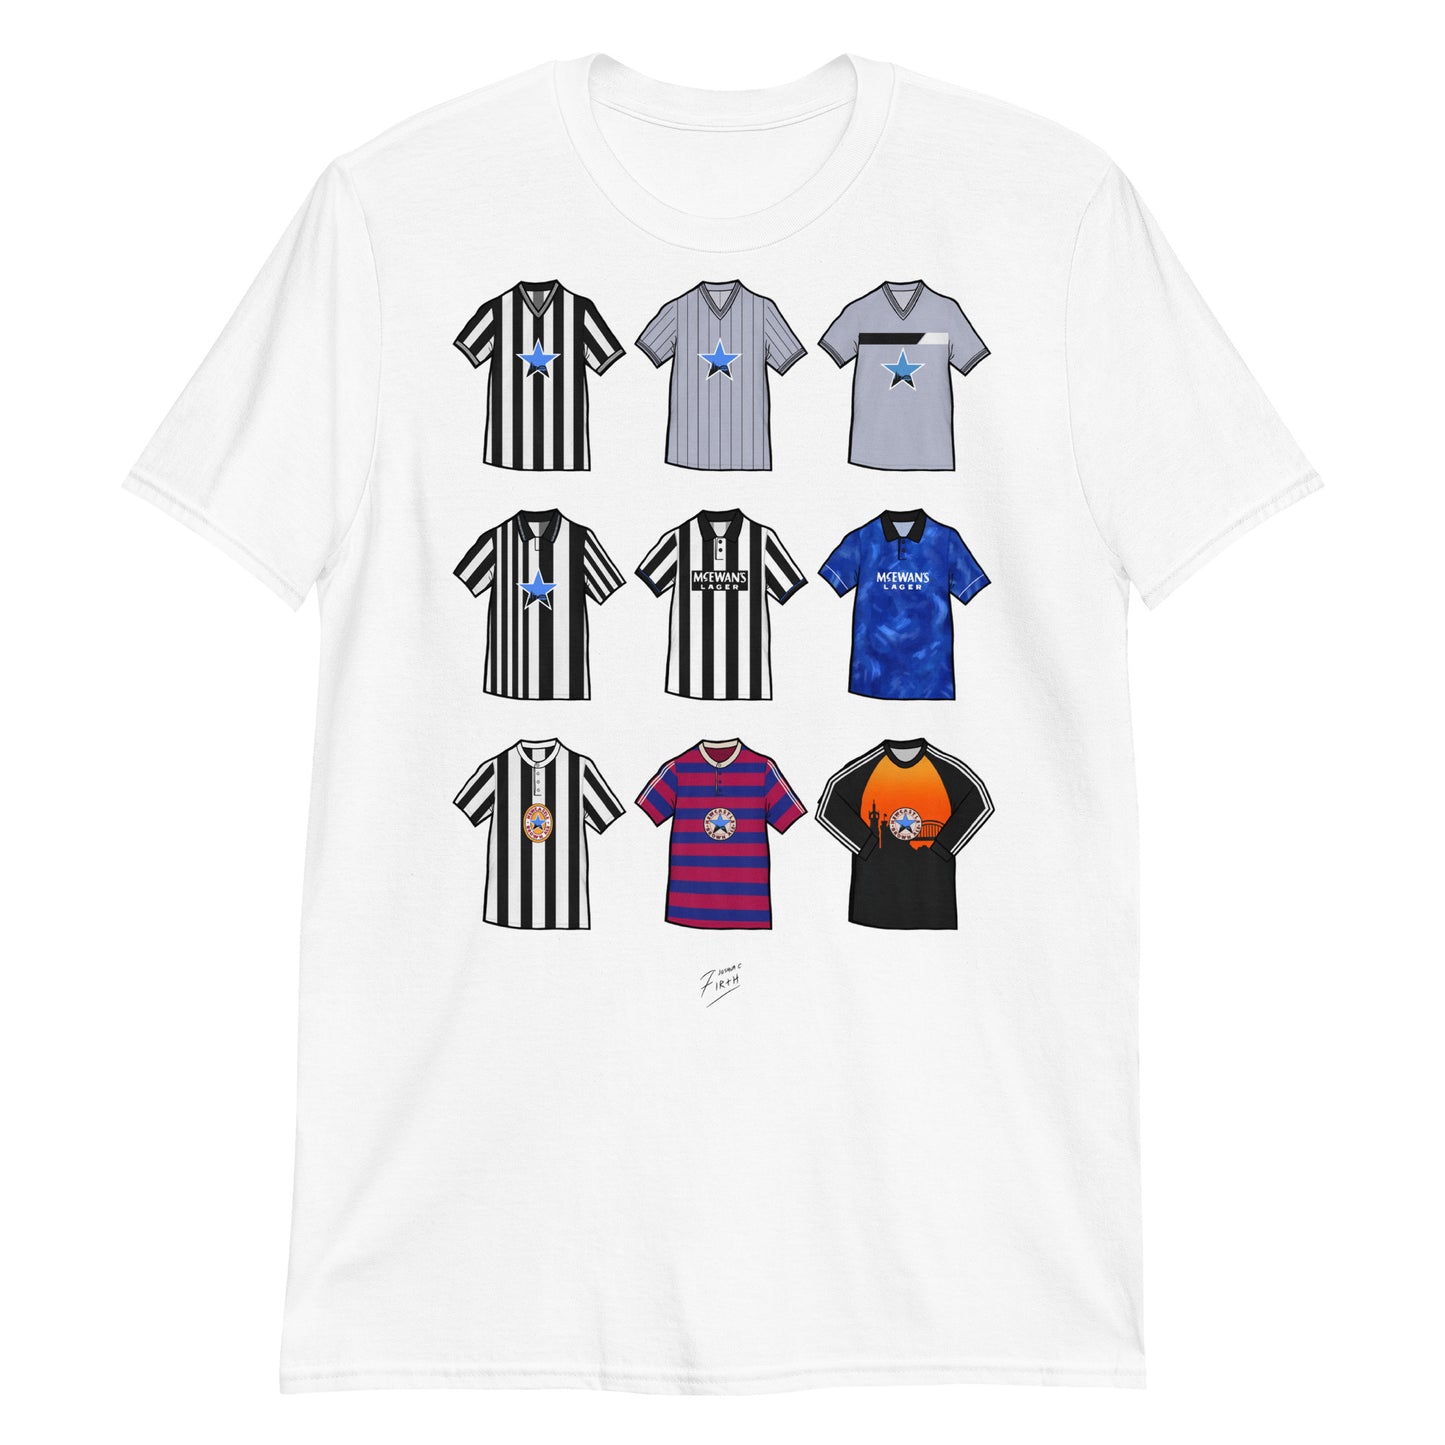 White T-shirt inspired by Newcastle United jersey's of the past, retro Iconic designs